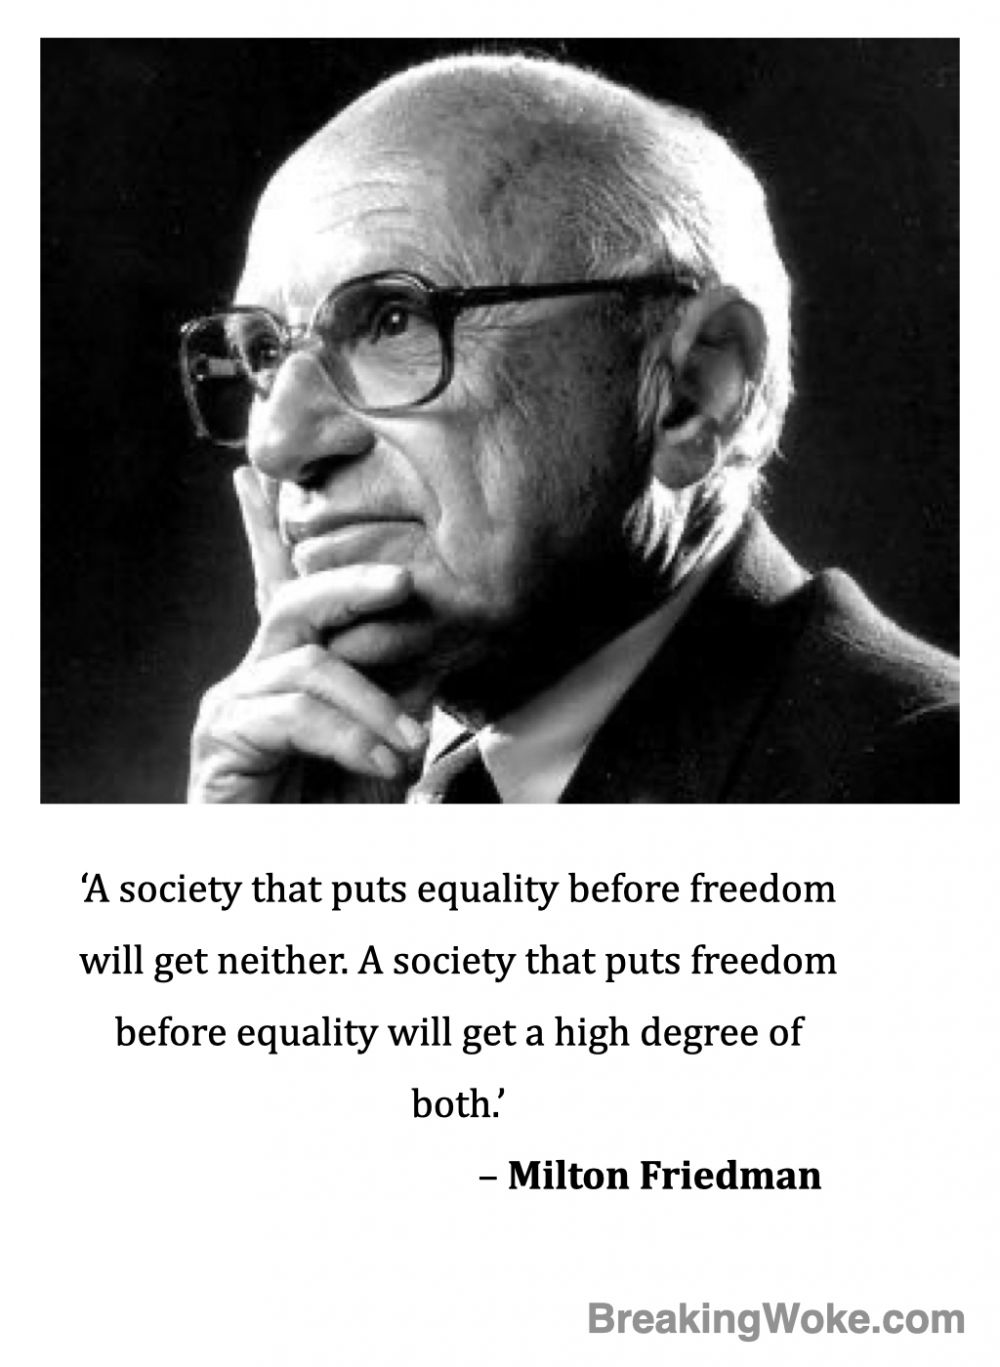 Freedom and Equality